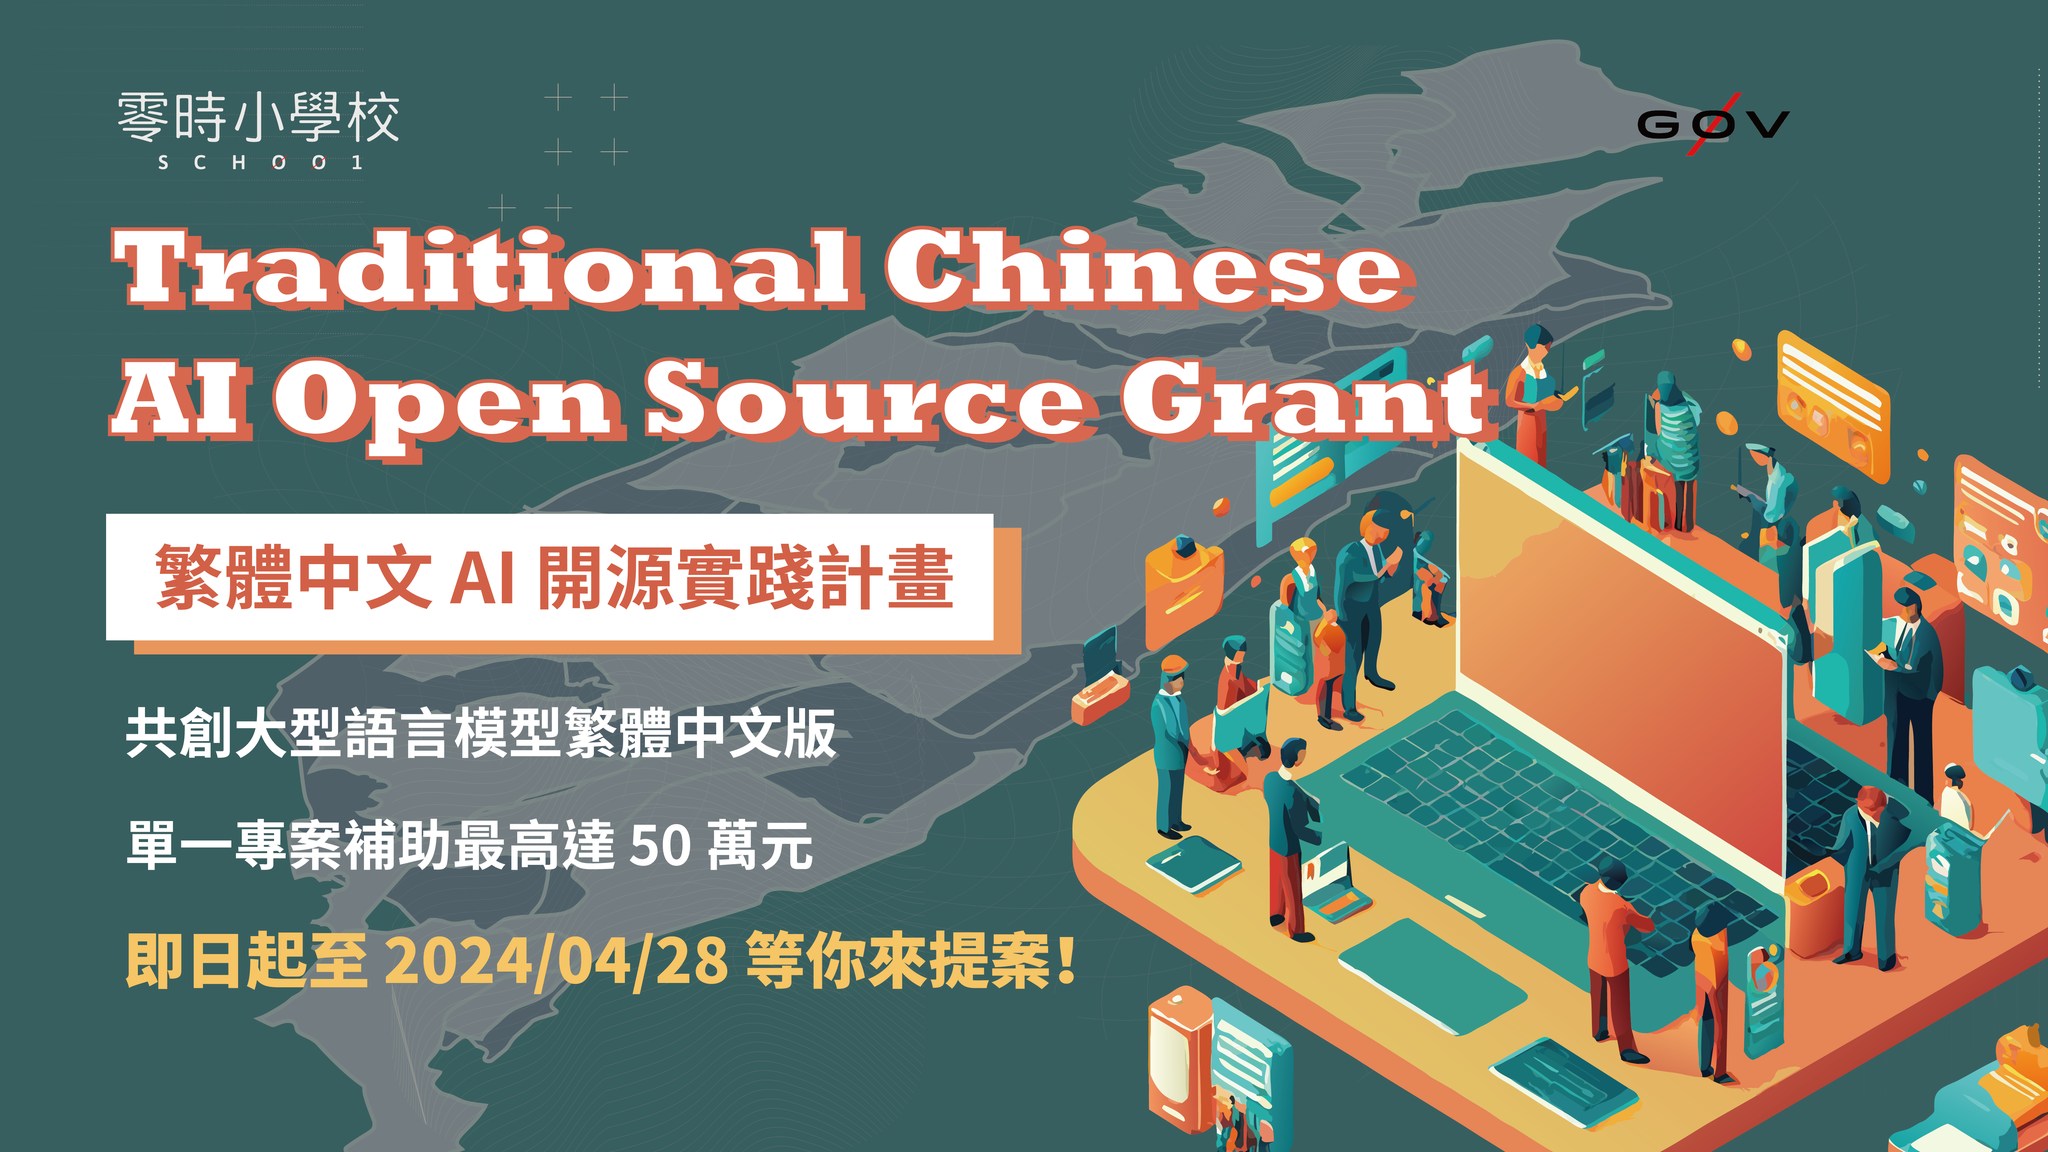 You are currently viewing 繁體中文 AI 開源實踐計畫 Traditional Chinese AI Open Source Grant